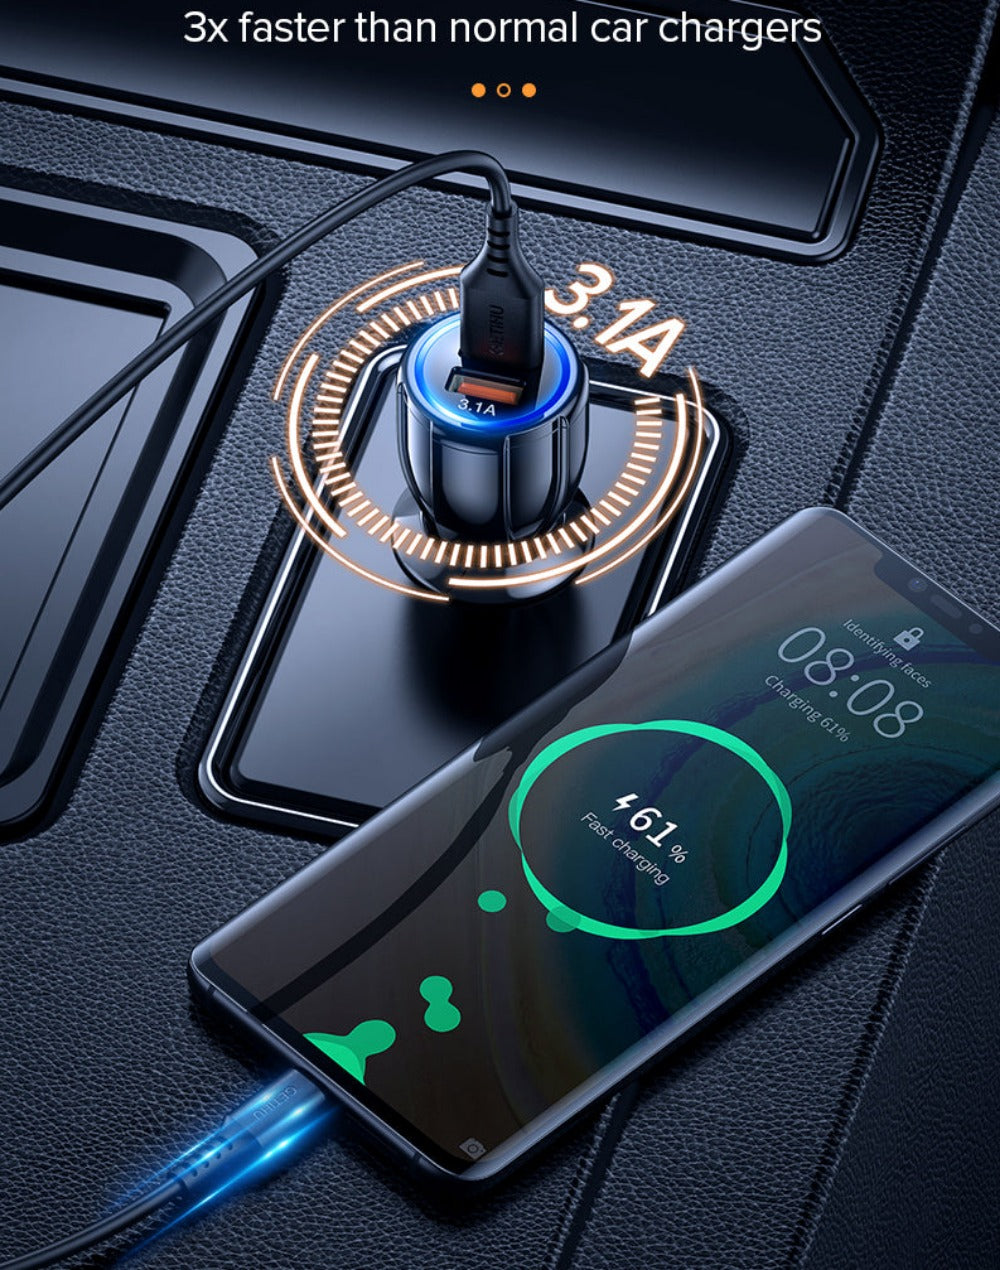 Everyday.Discount buy car phone charger pinterest quick charging ibatGRm universal fast charging cigarette  lighter tiktok facebook.ipad iphone samsung android ios apple phones chargers universal charging xtra ports everyday free.shipping